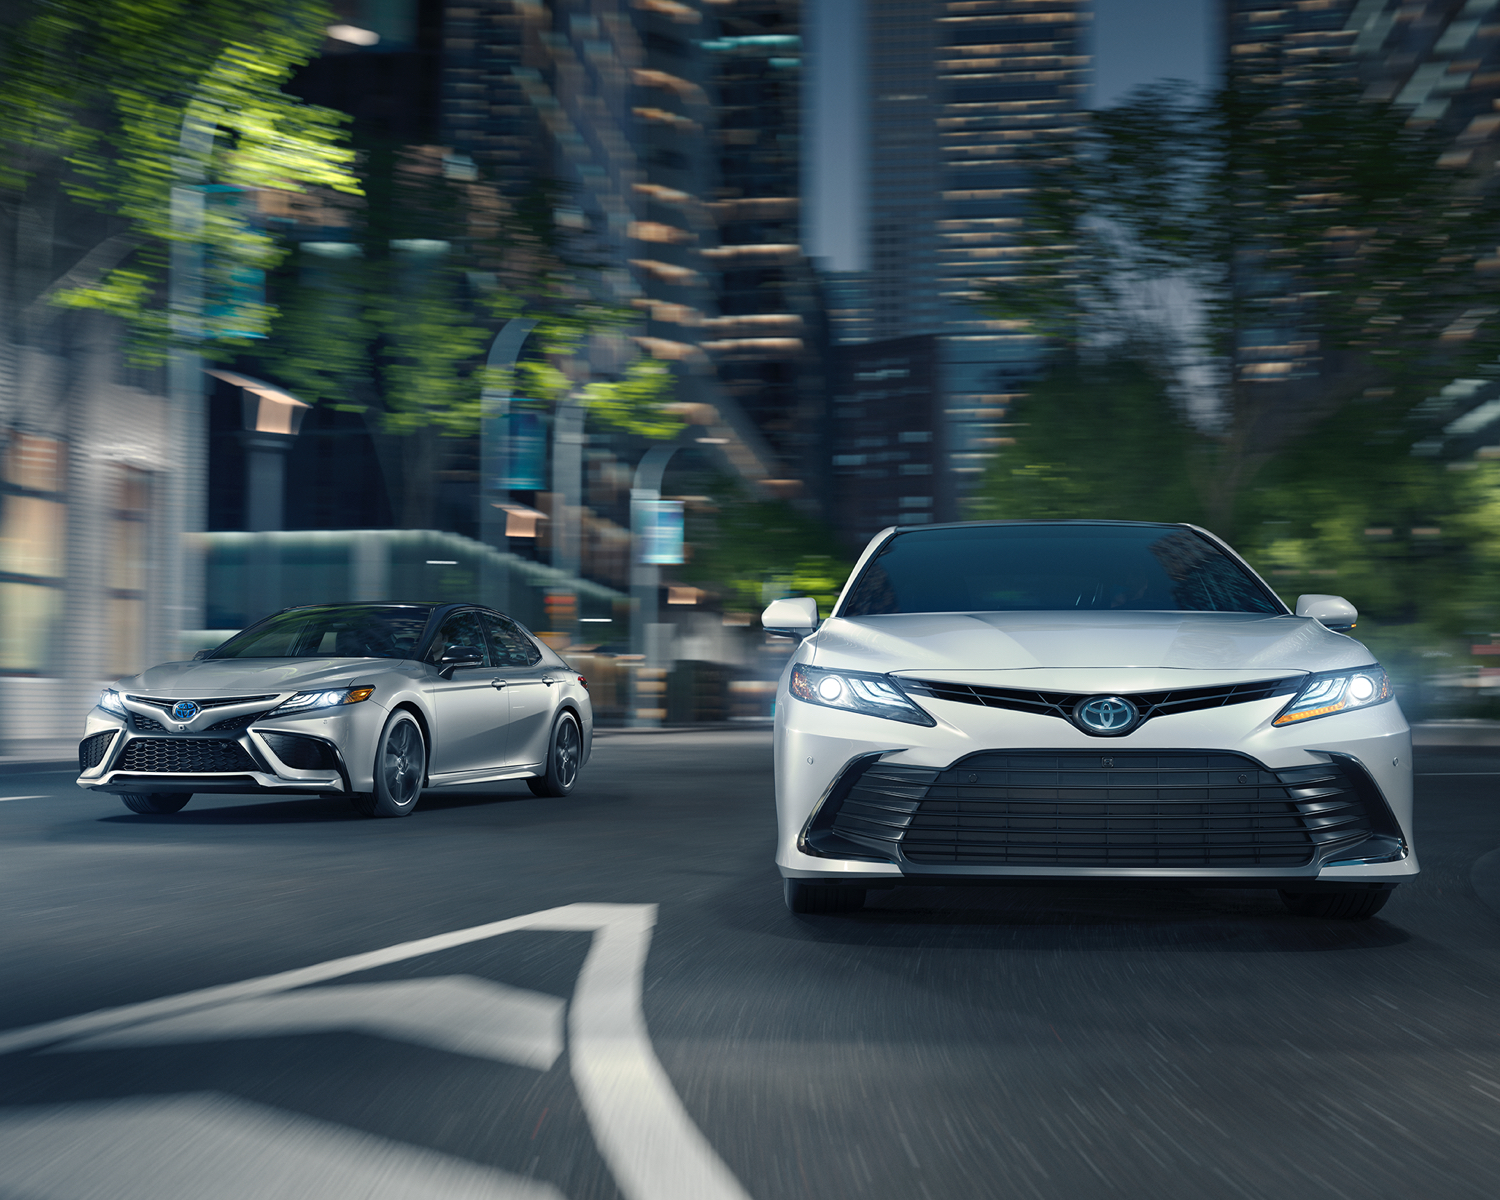 Camry Hybrid XSE shown in Celestial Silver Metallic with Black Roof and Camry Hybrid XLE shown in Wind Chill Pearl